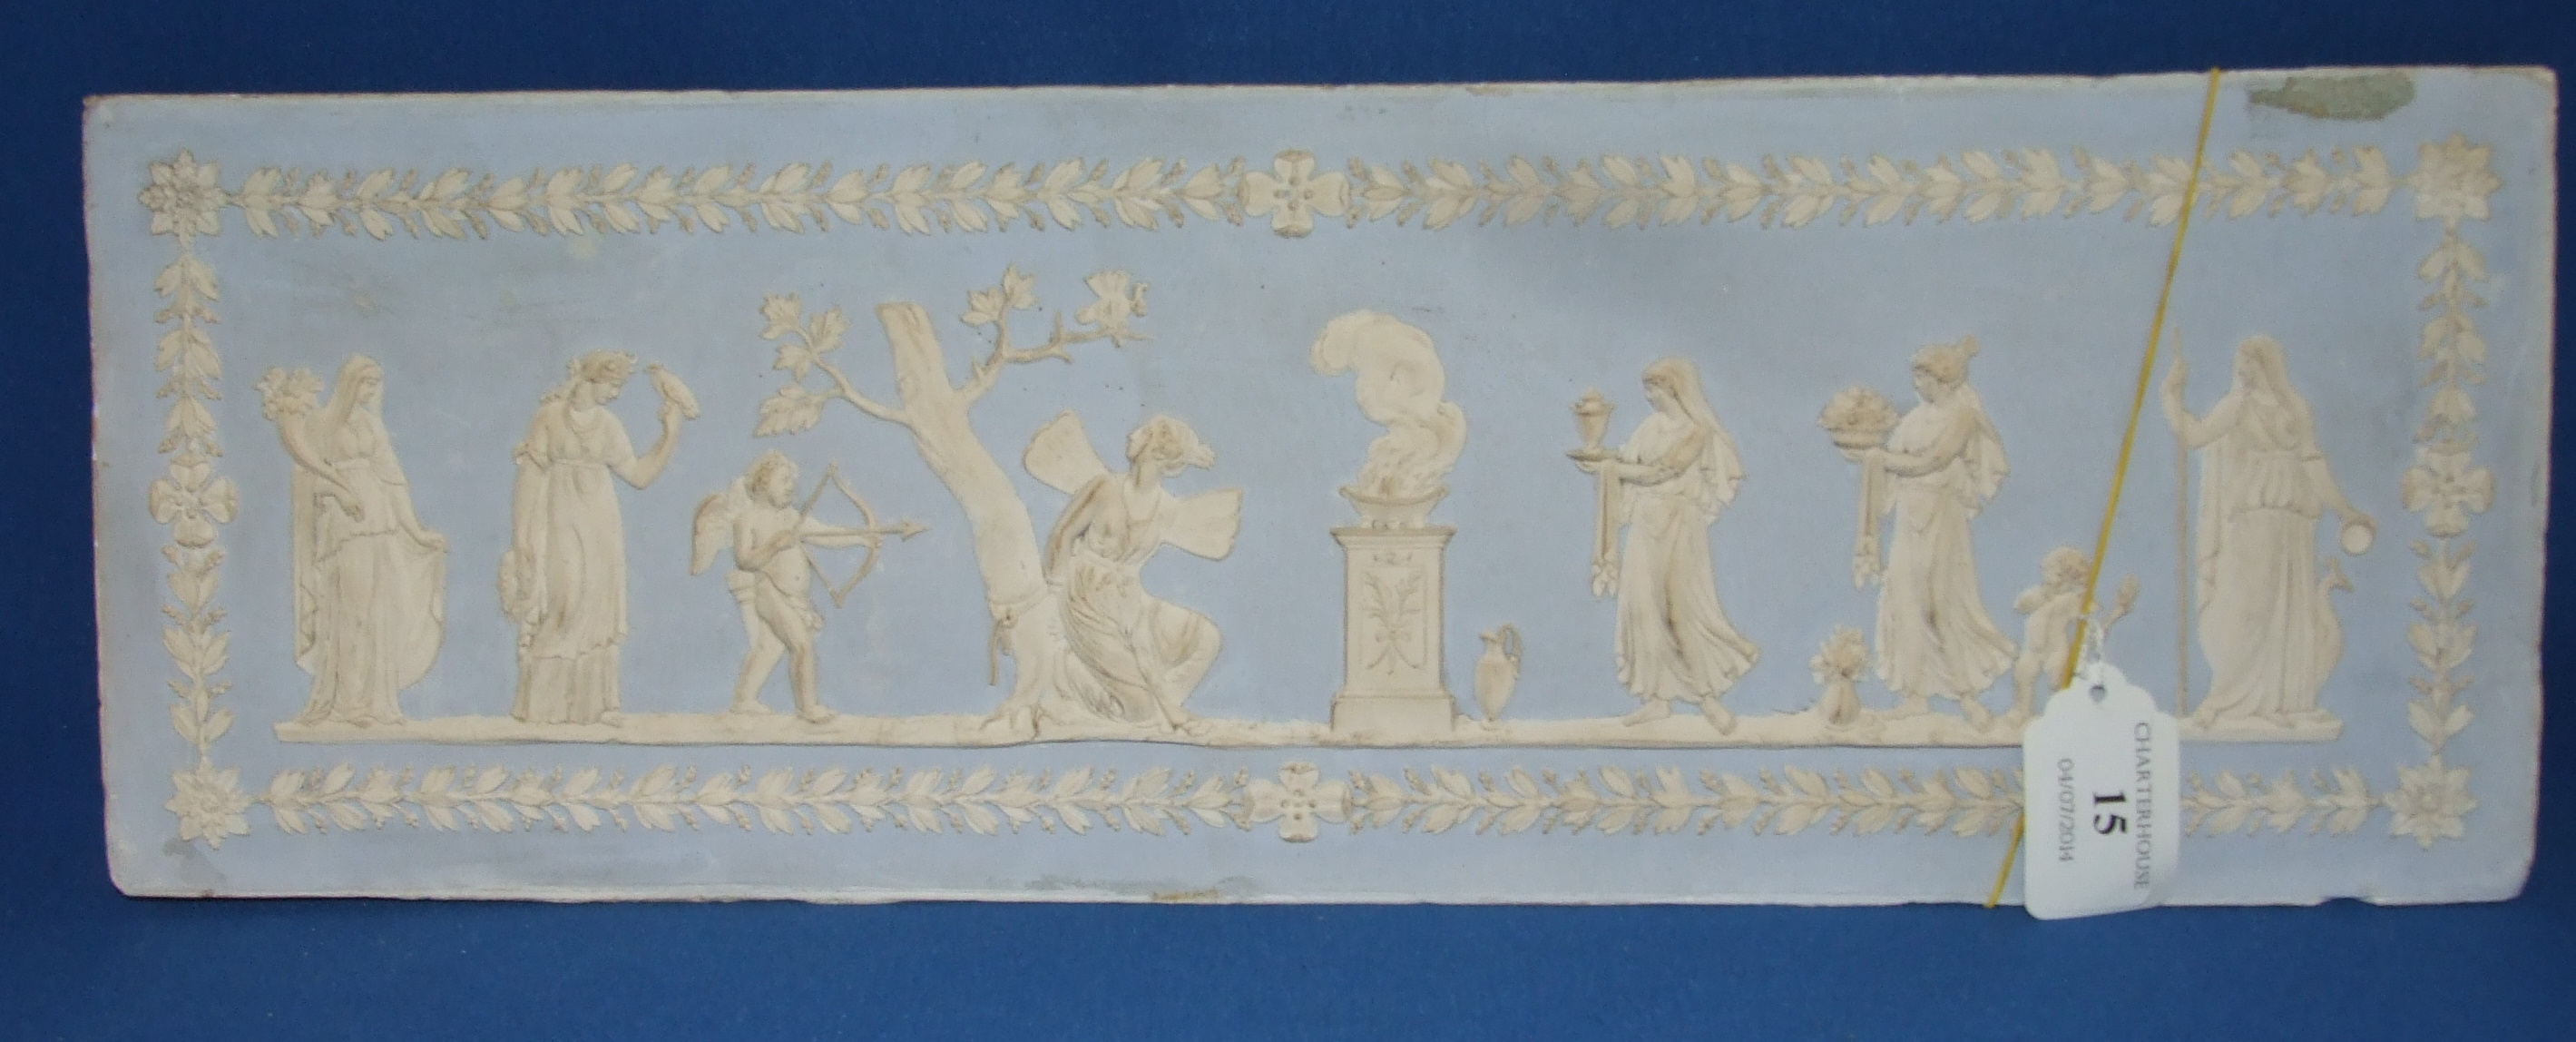 A plaster panel, decorated figures in relief, 15.5 x 46.5 cm